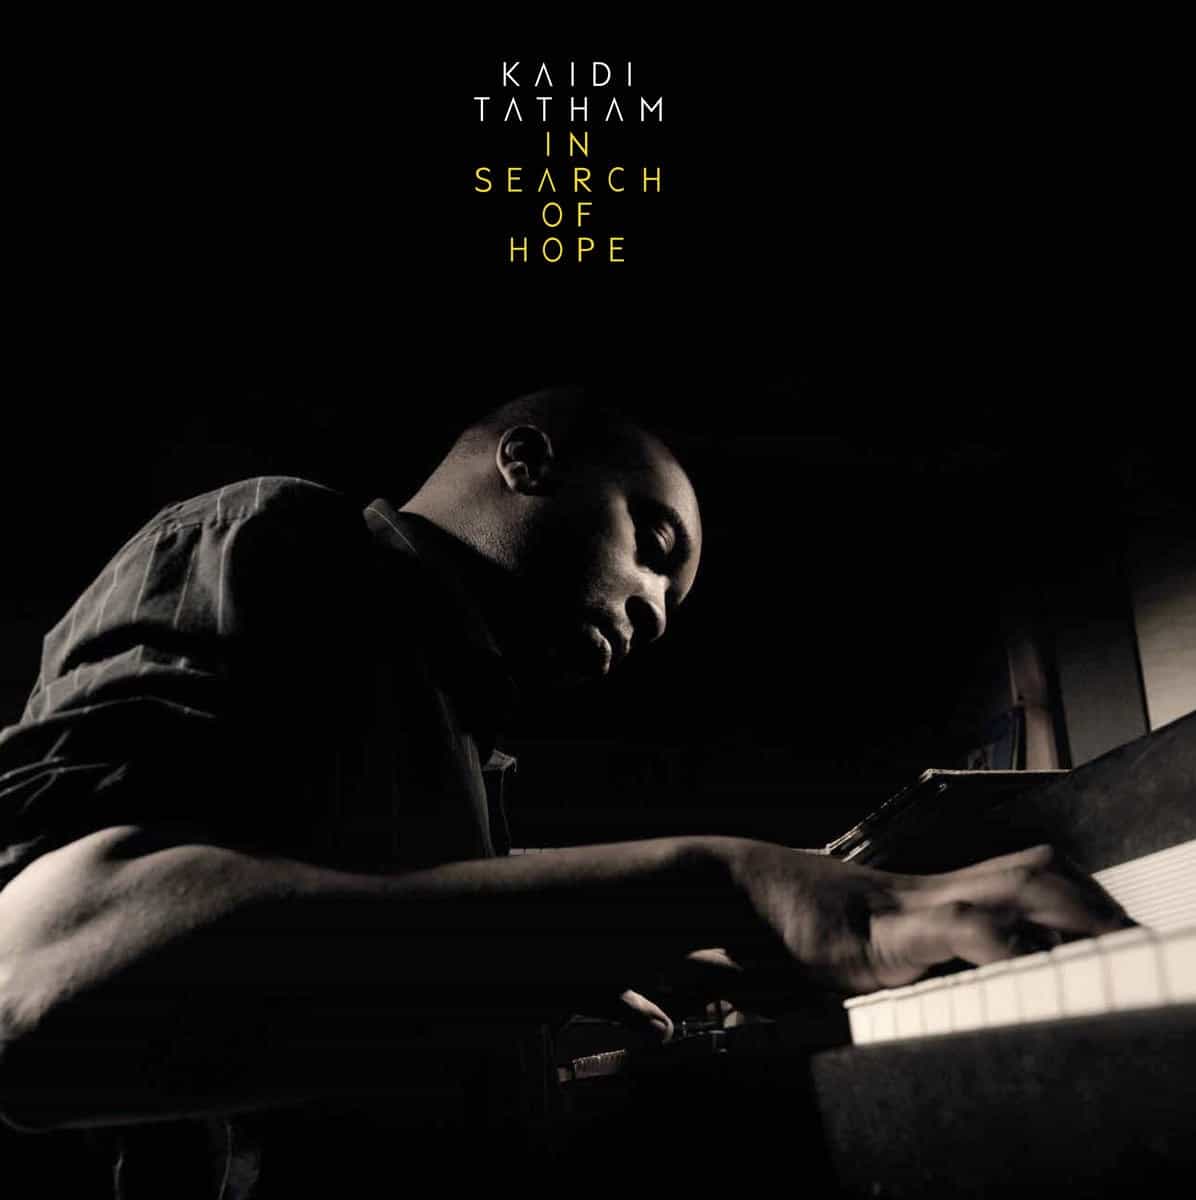 In Search of Hope – Album by Kaidi Tatham